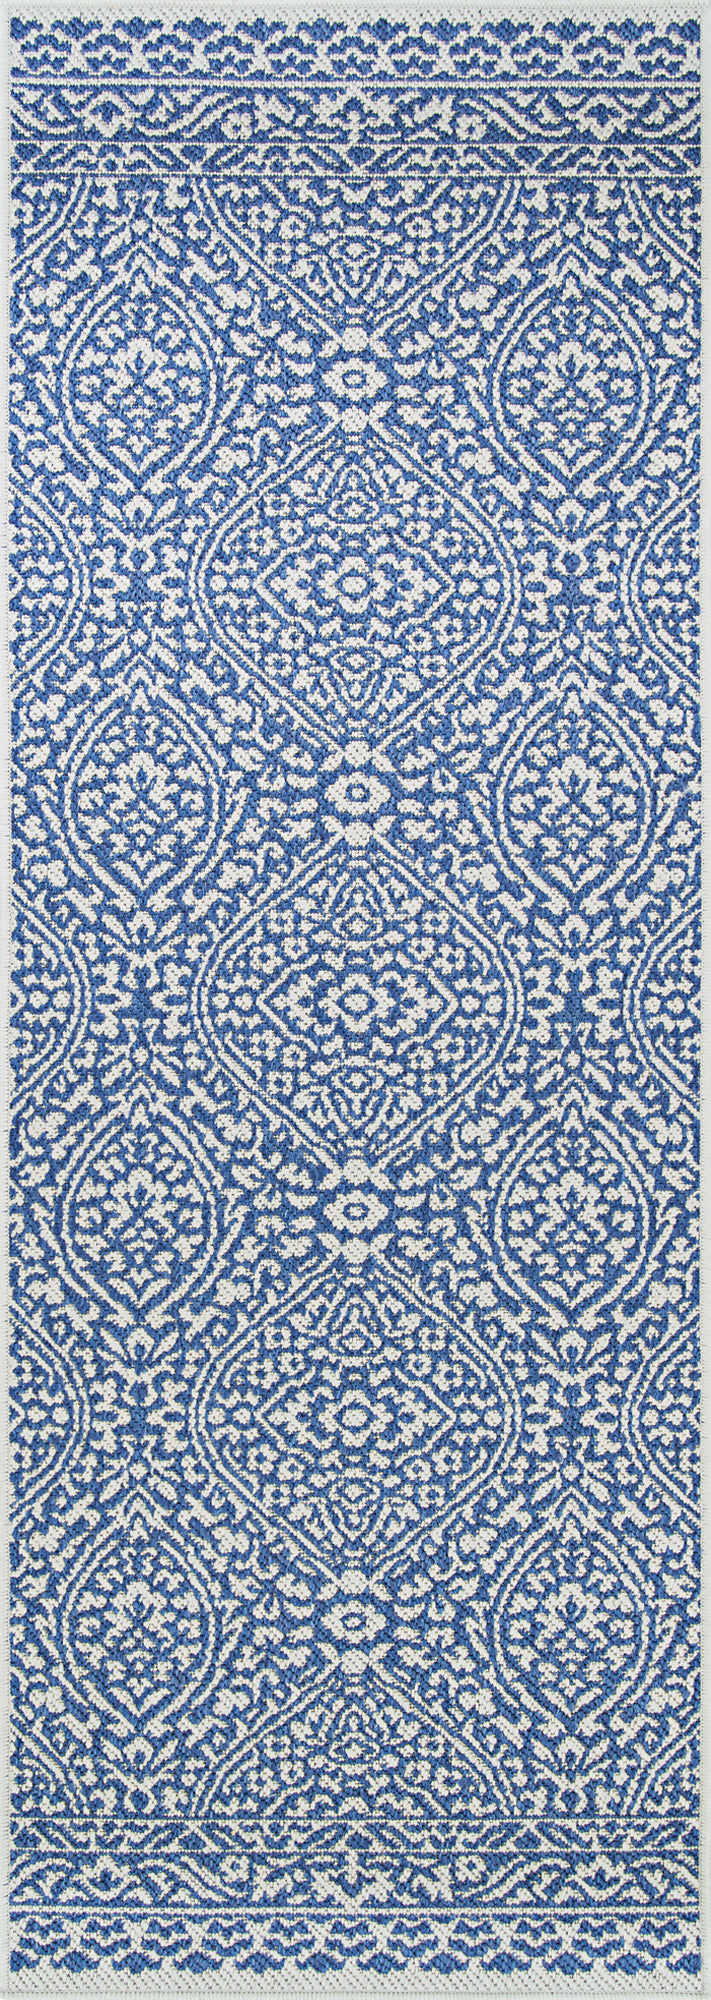 Couristan Outdurables Flower Festival Sea and Dune Area Rug